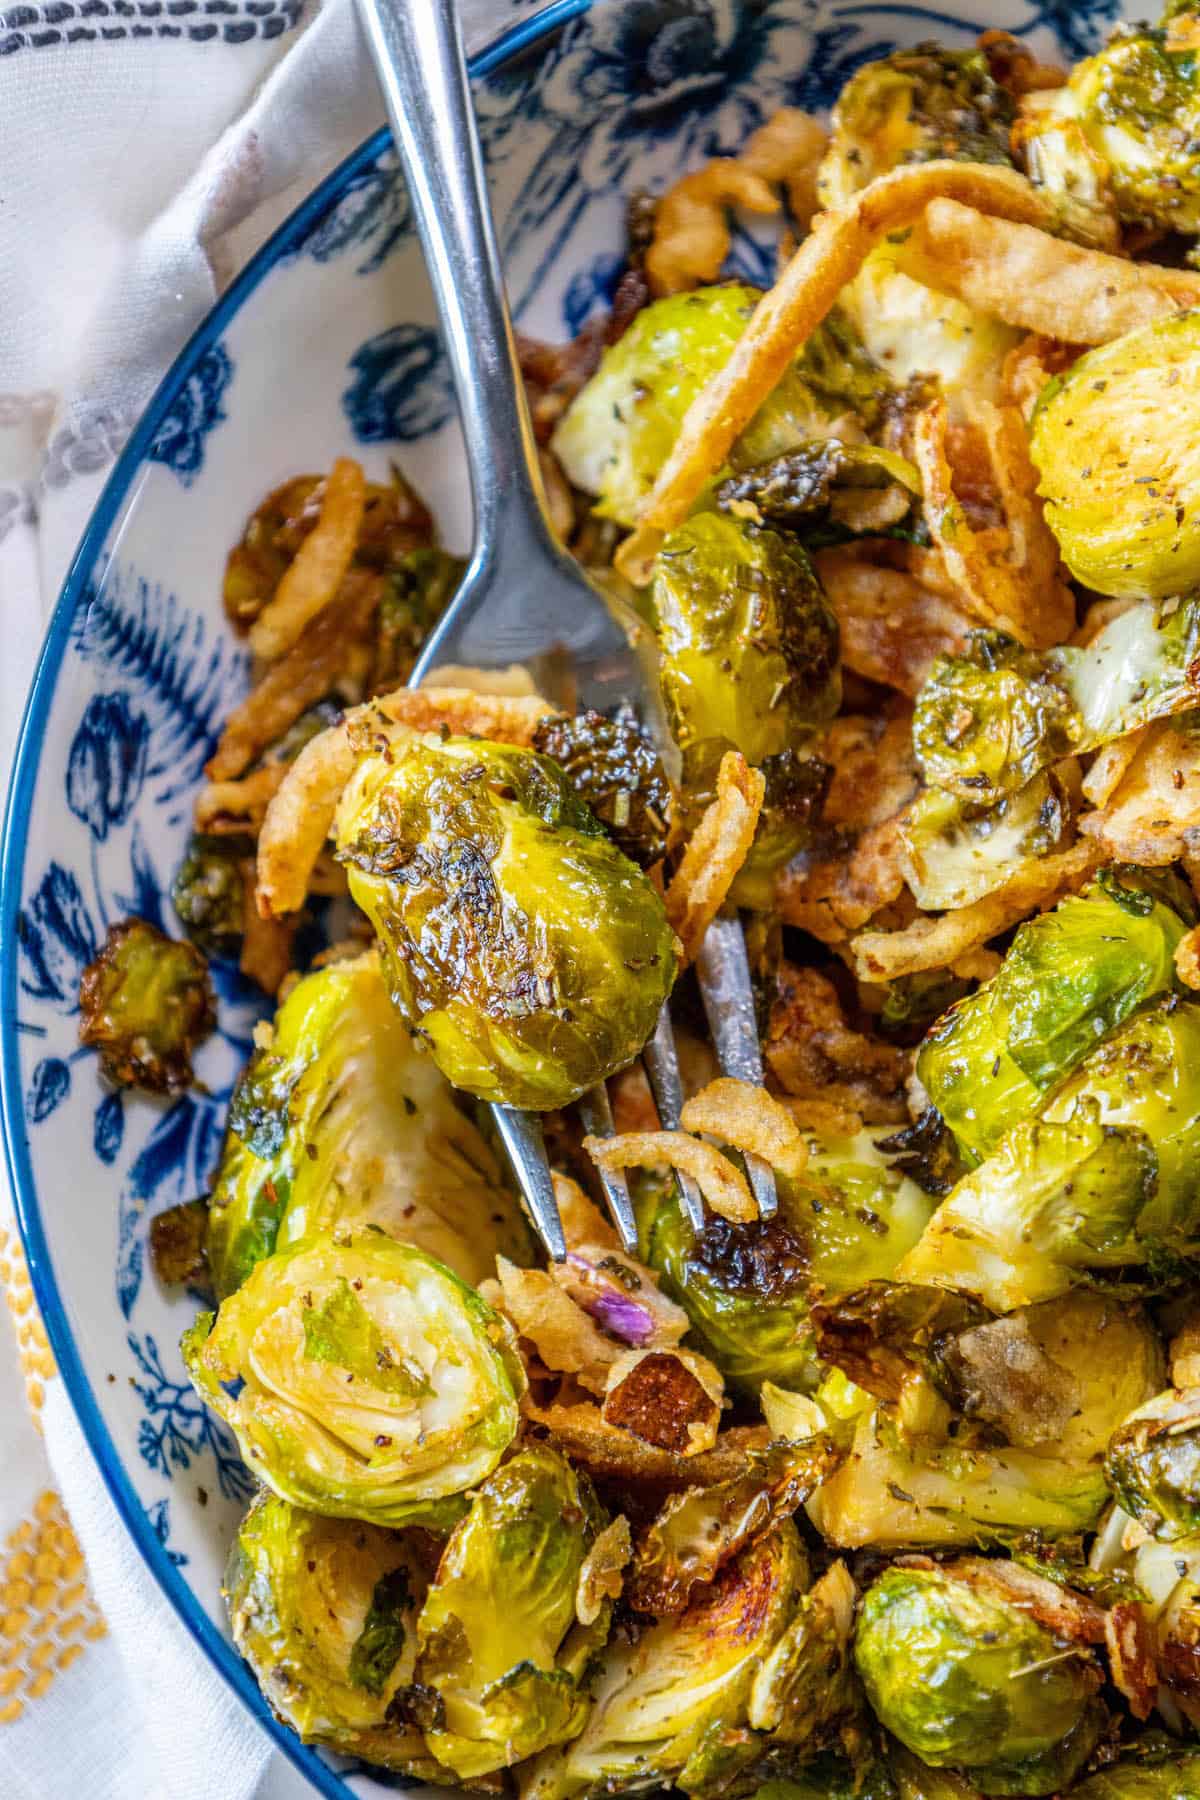 Roasted Brussels sprouts in a blue and white bowl with a fork.